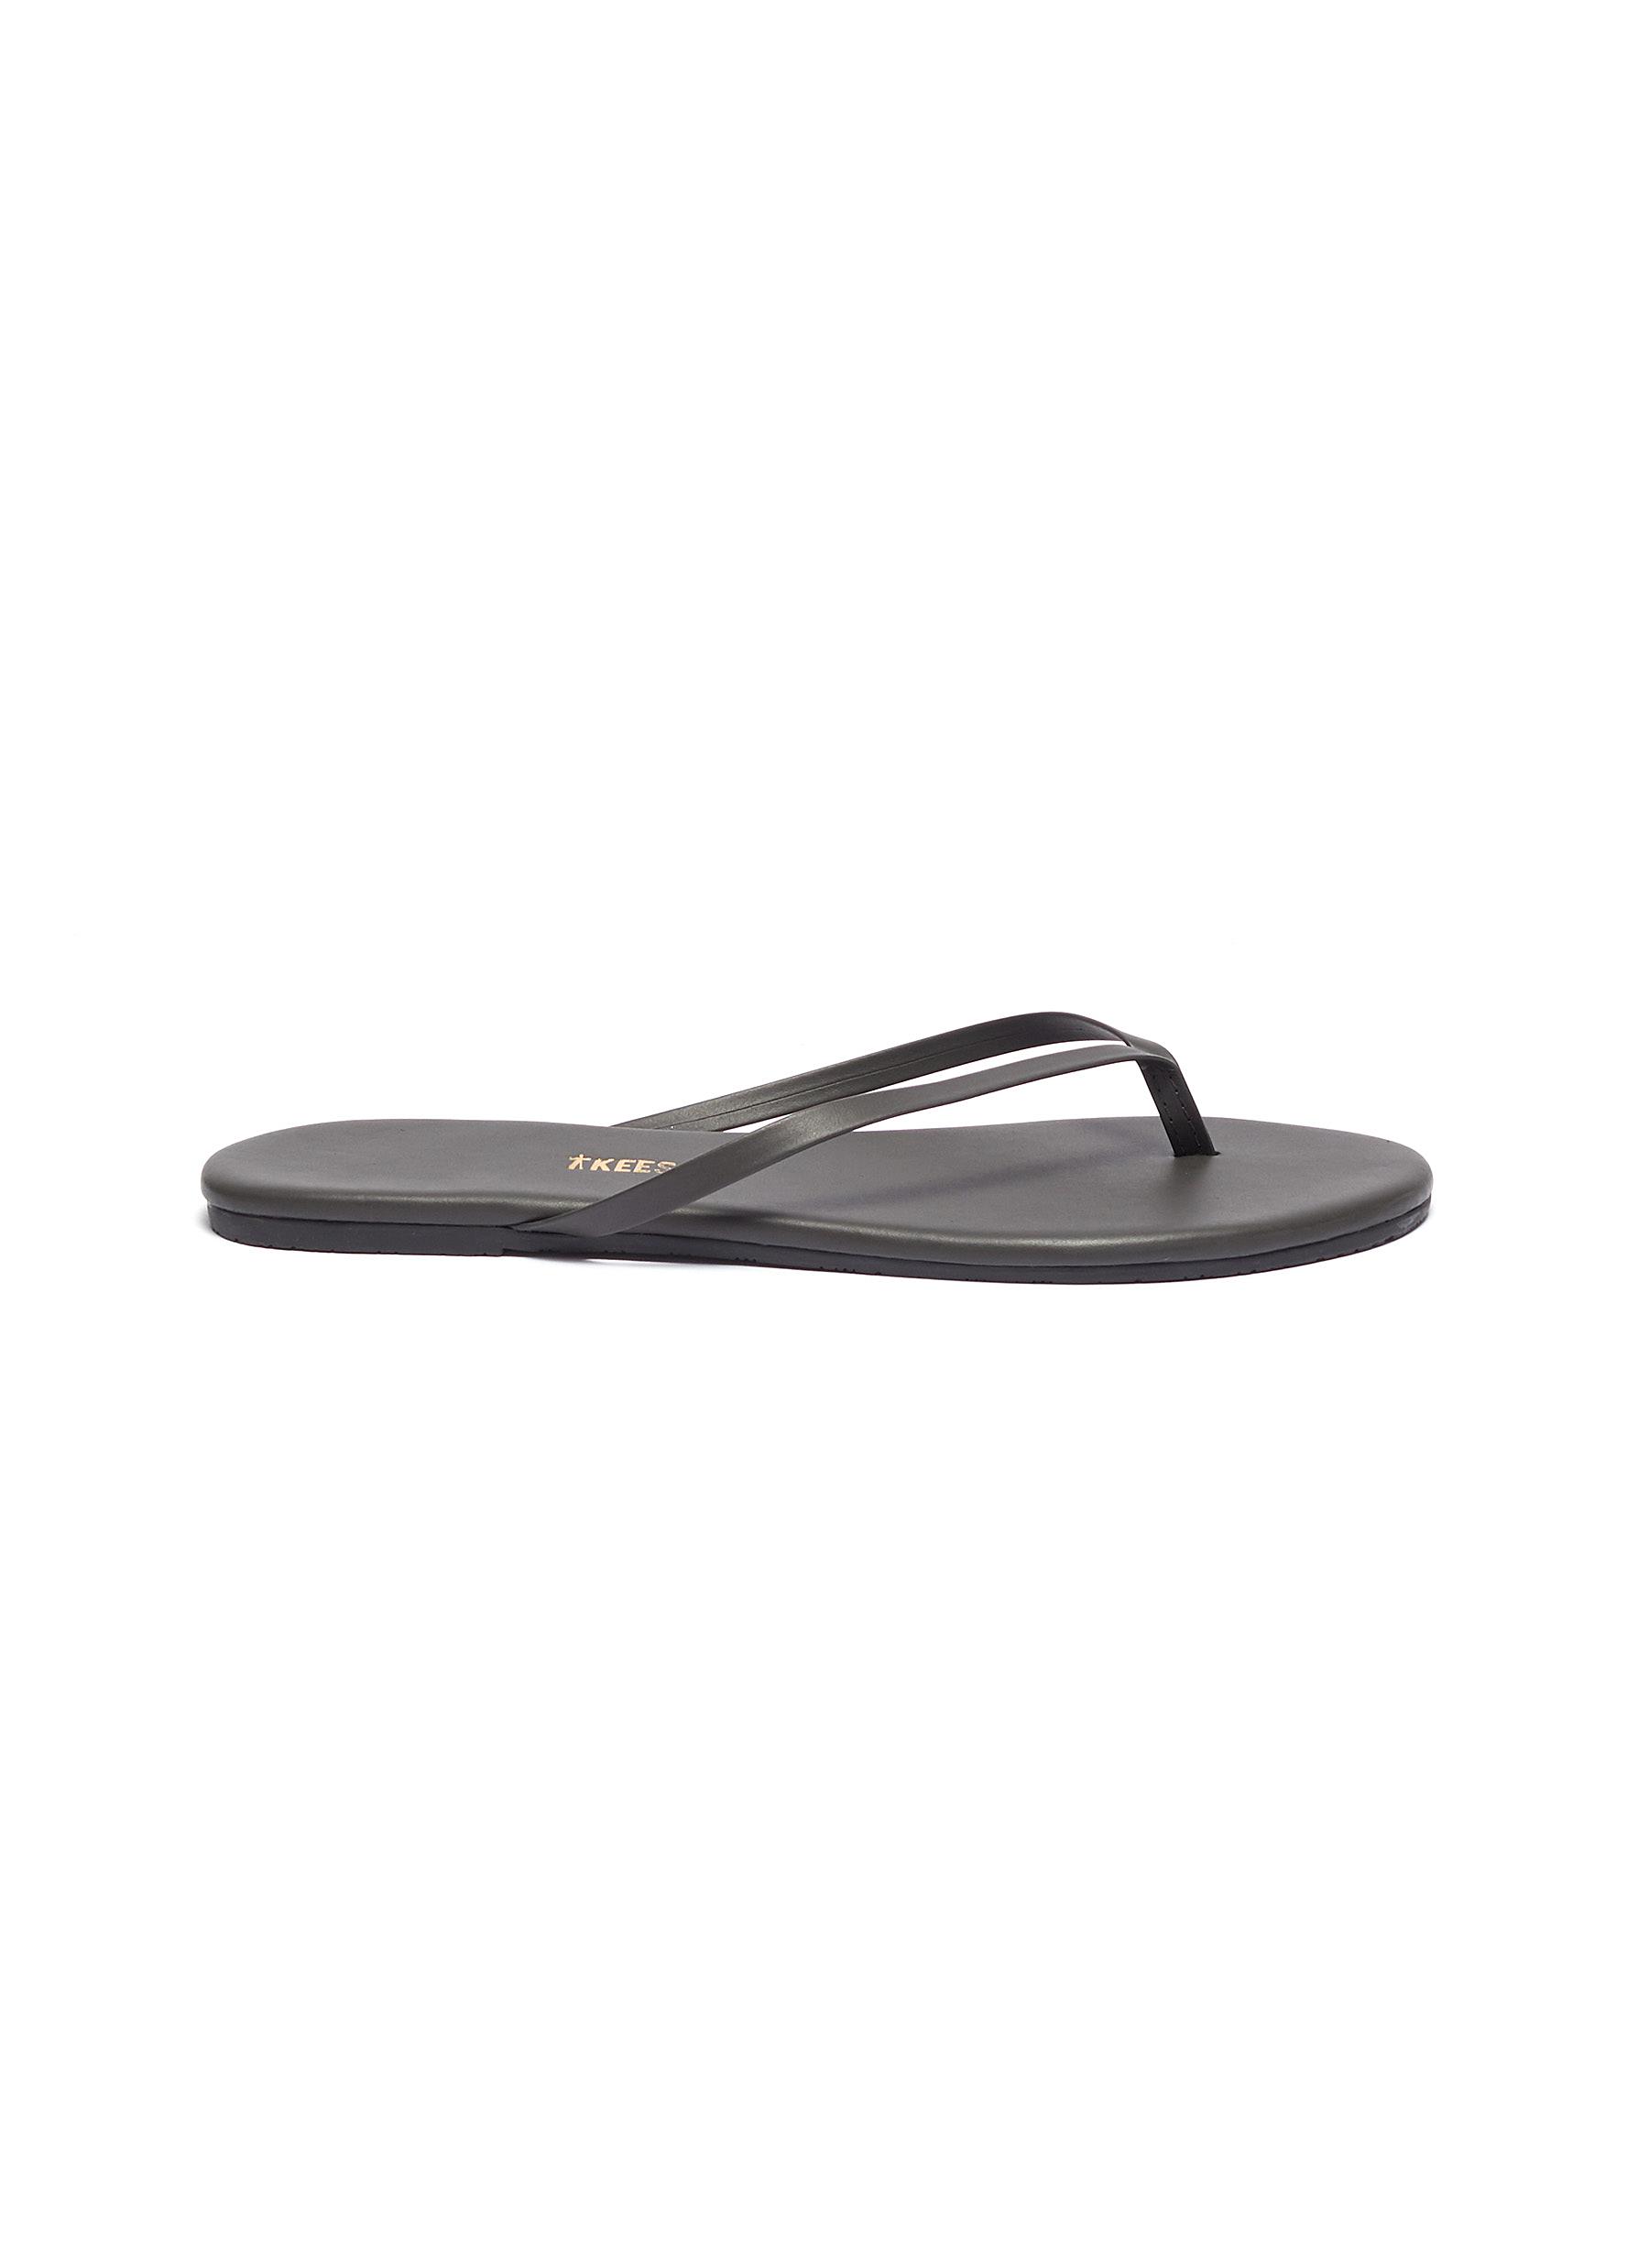 Solids leather flip flops by Tkees